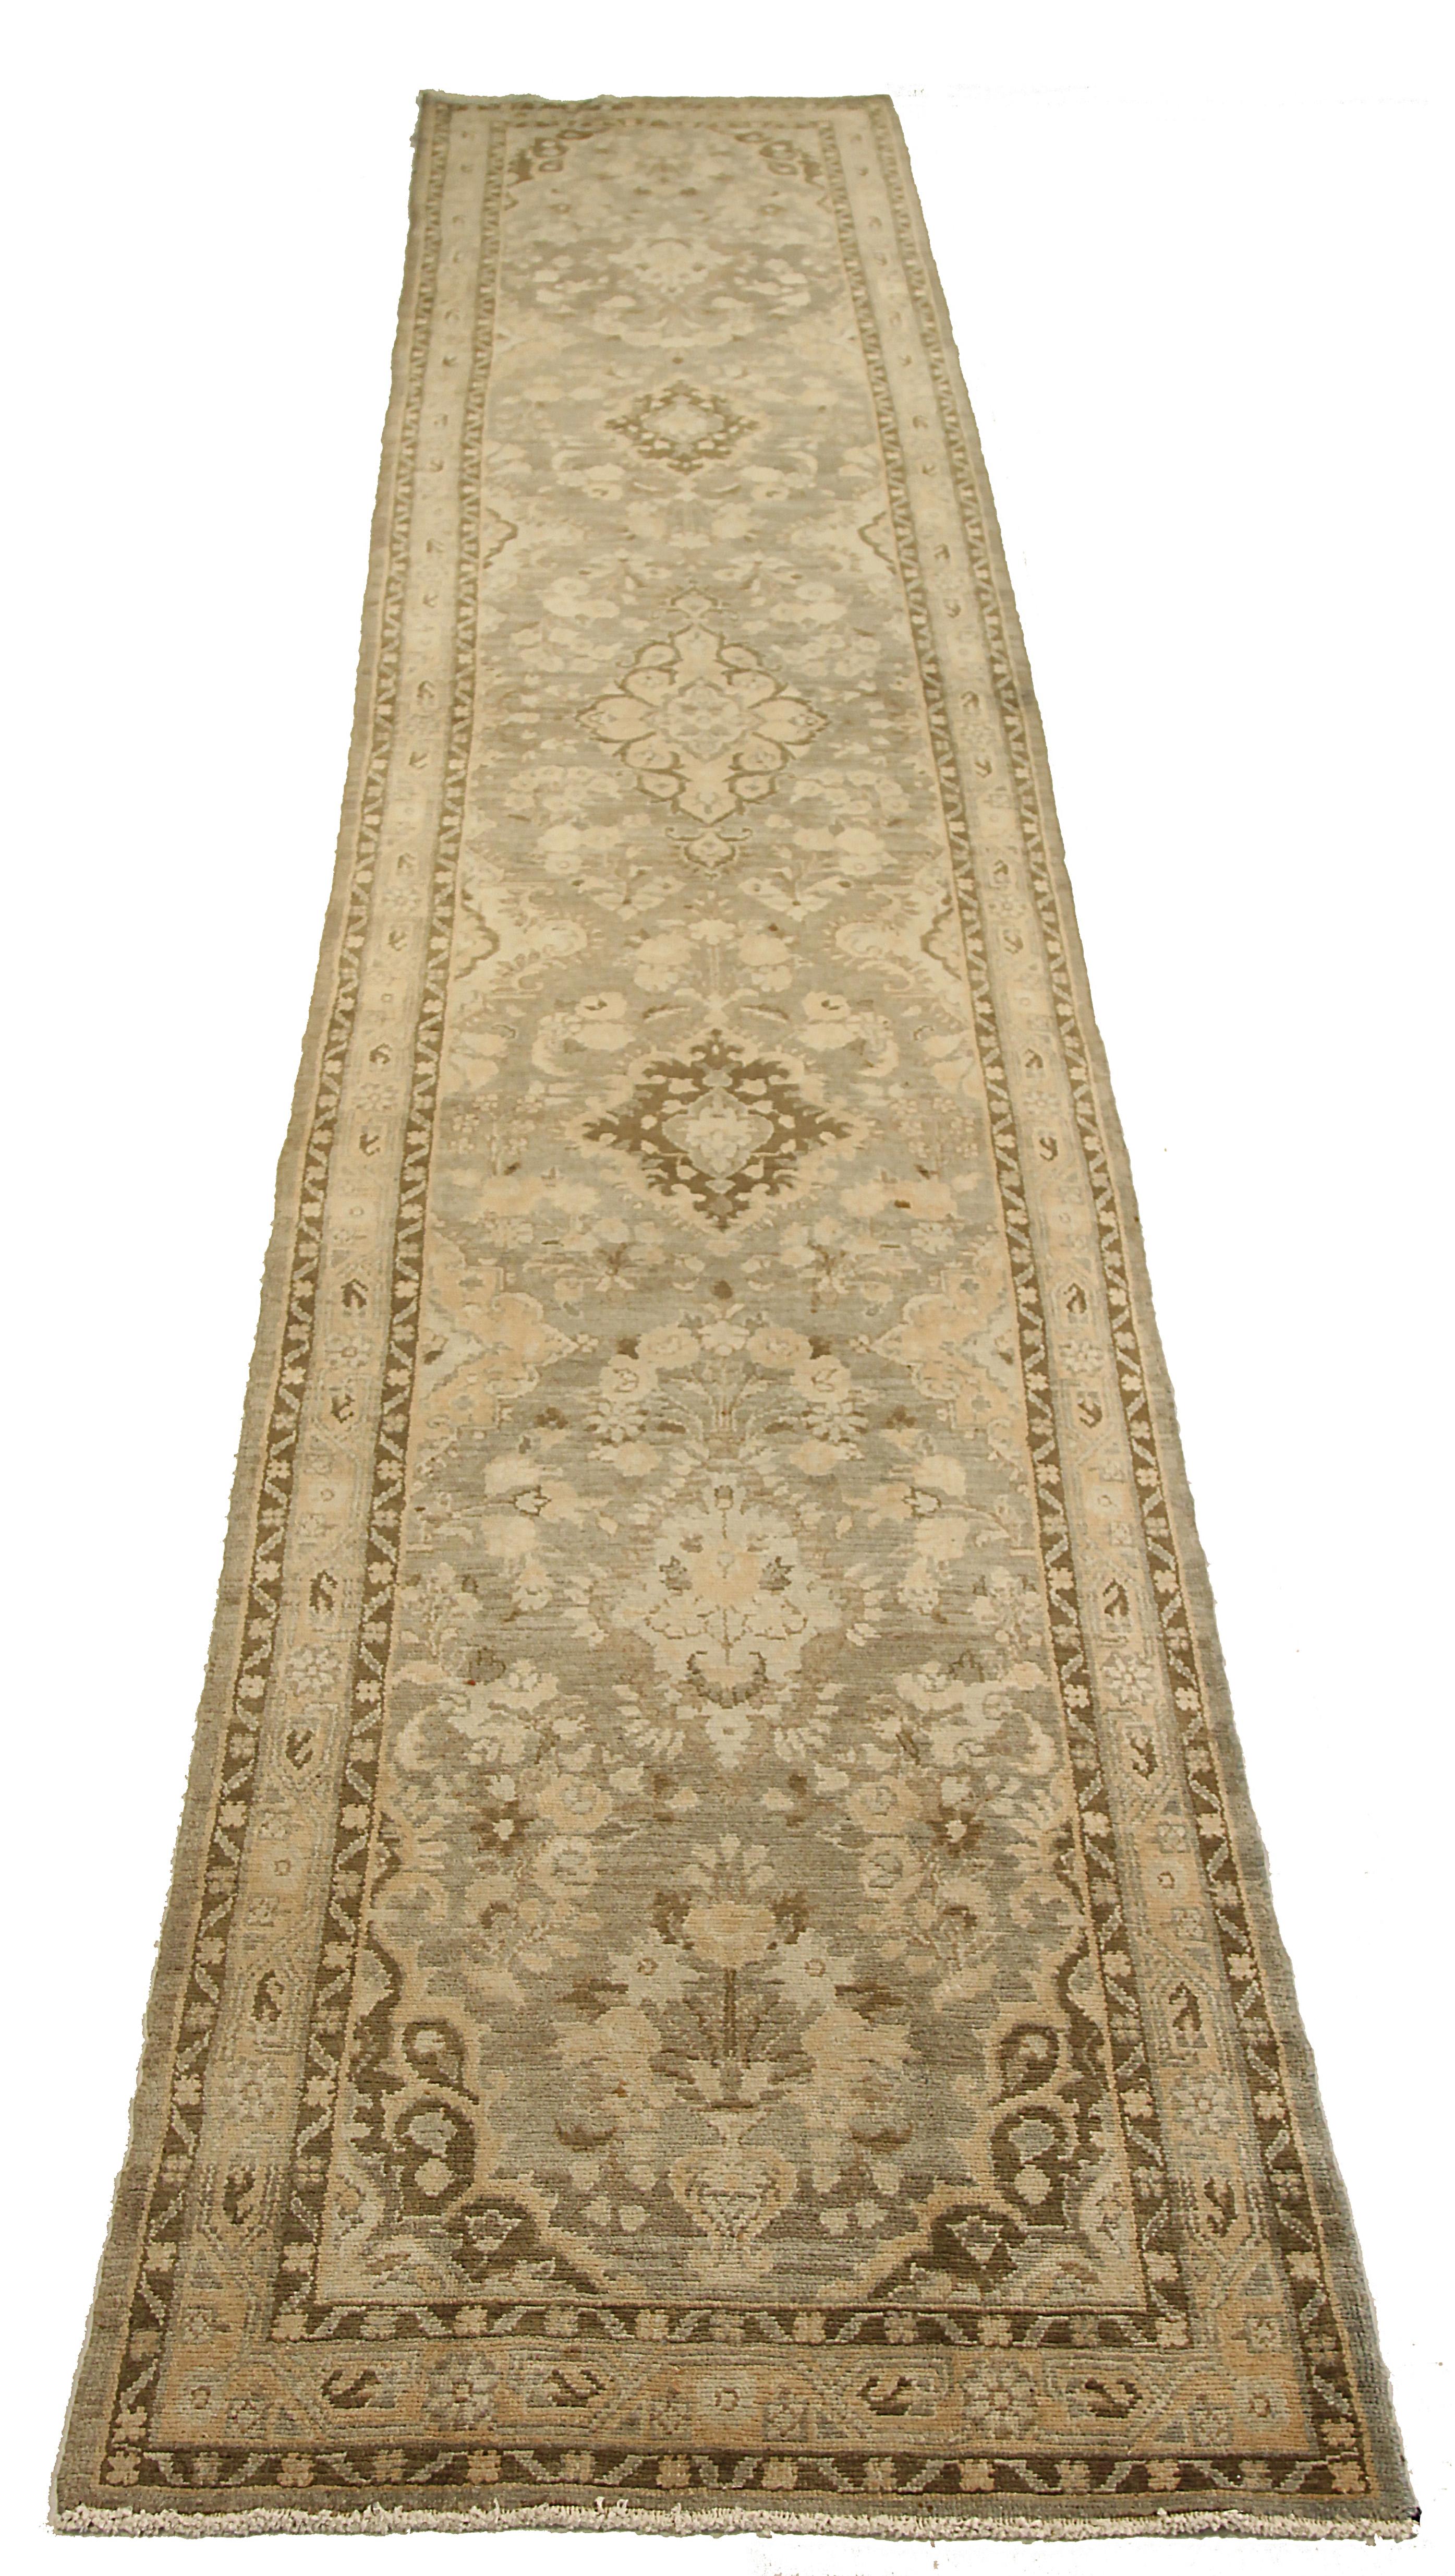 Antique Persian runner rug handwoven from the finest sheep’s wool. It’s colored with all-natural vegetable dyes that are safe for humans and pets. It’s a traditional Malayer design featuring floral and tribal design on a beige field. It’s a lovely